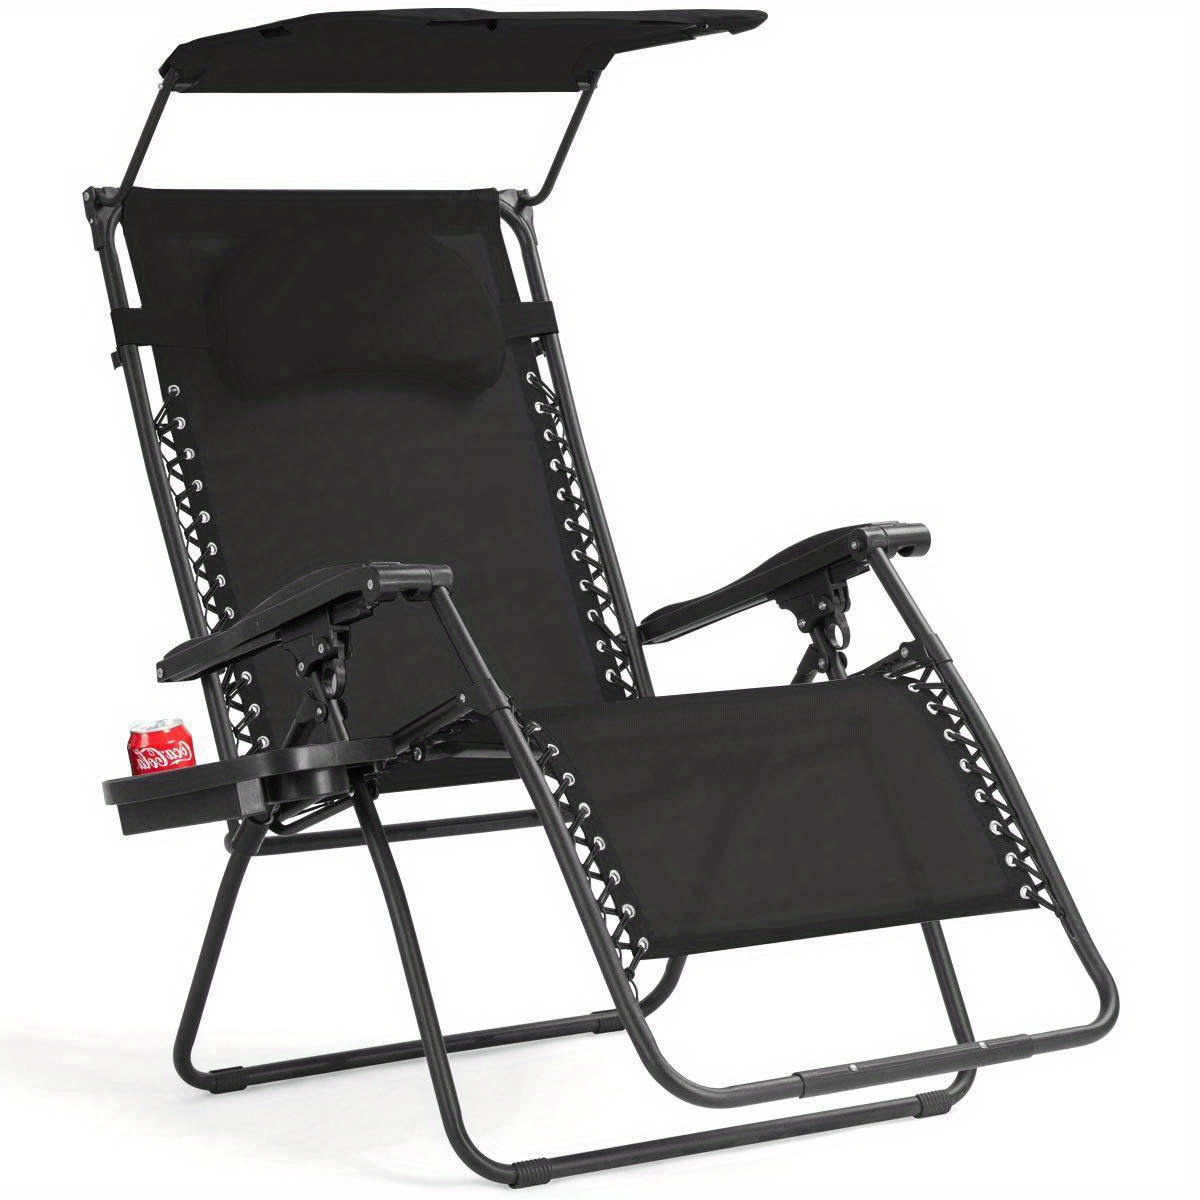 

Safstar Folding Recliner 0 Gravity Lounge Chair W/ Shade Canopy Cup Holder Black